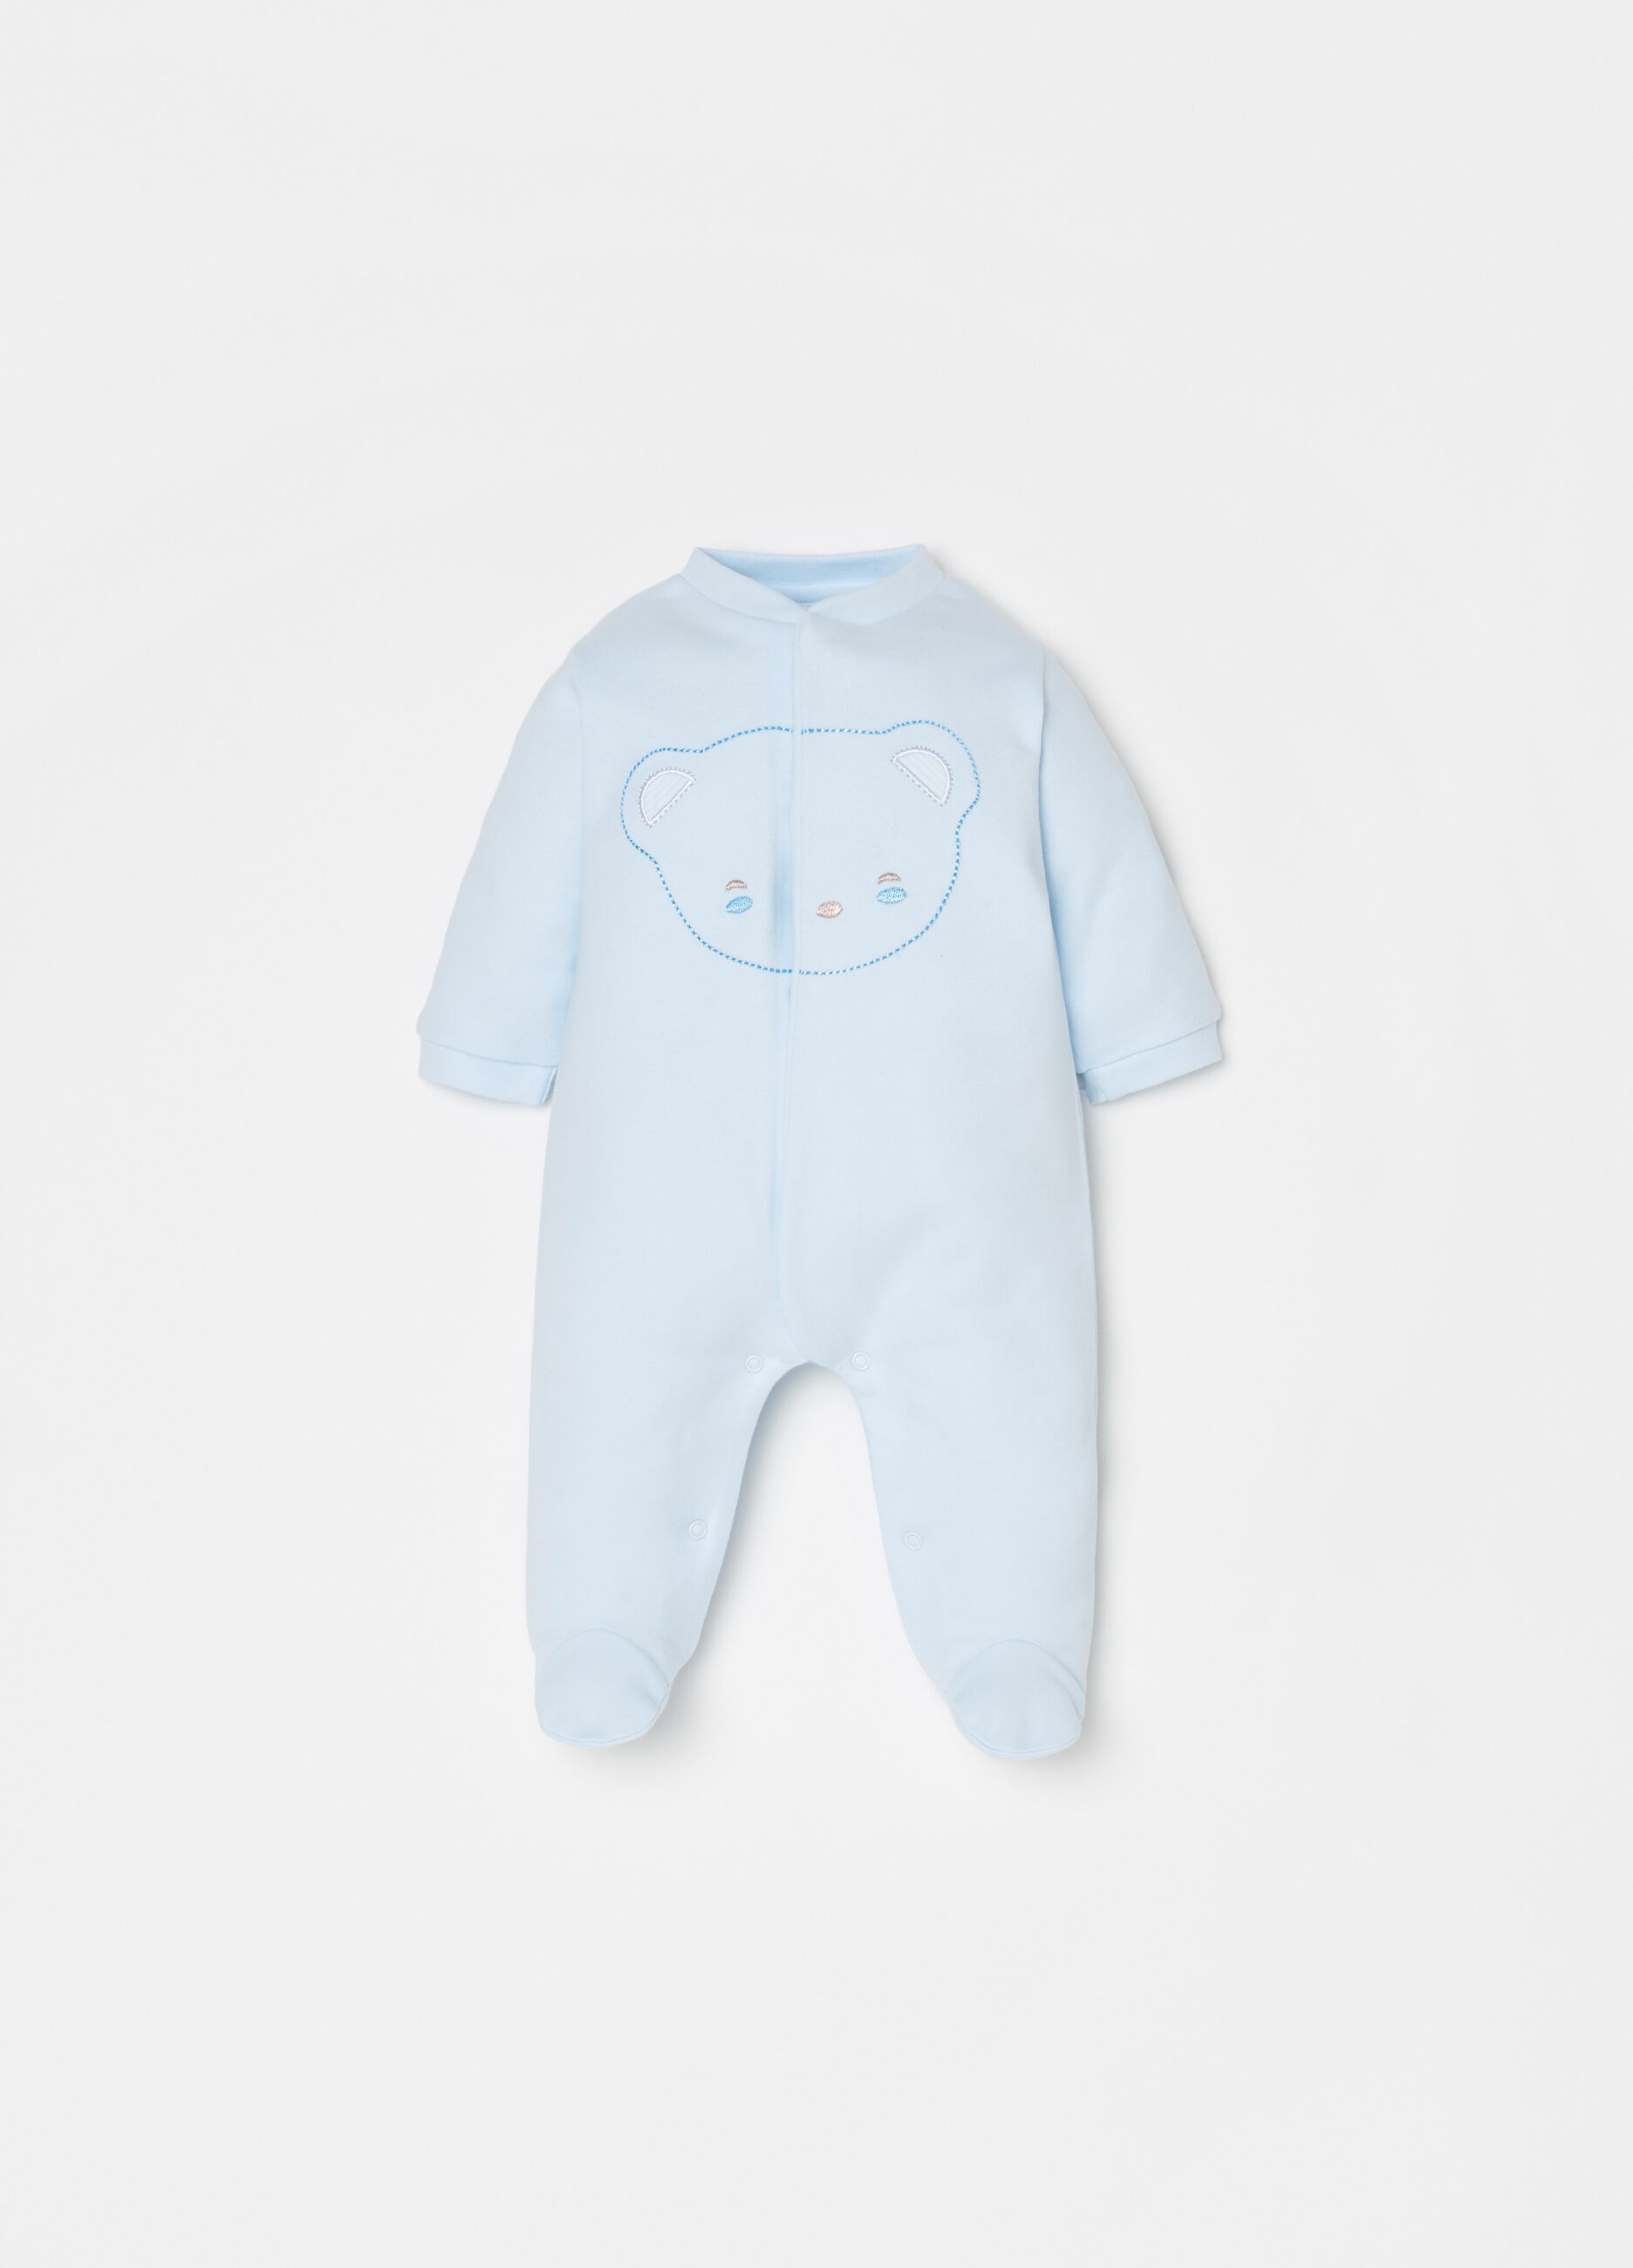 Cotton onesie with feet and teddy bear embroidery